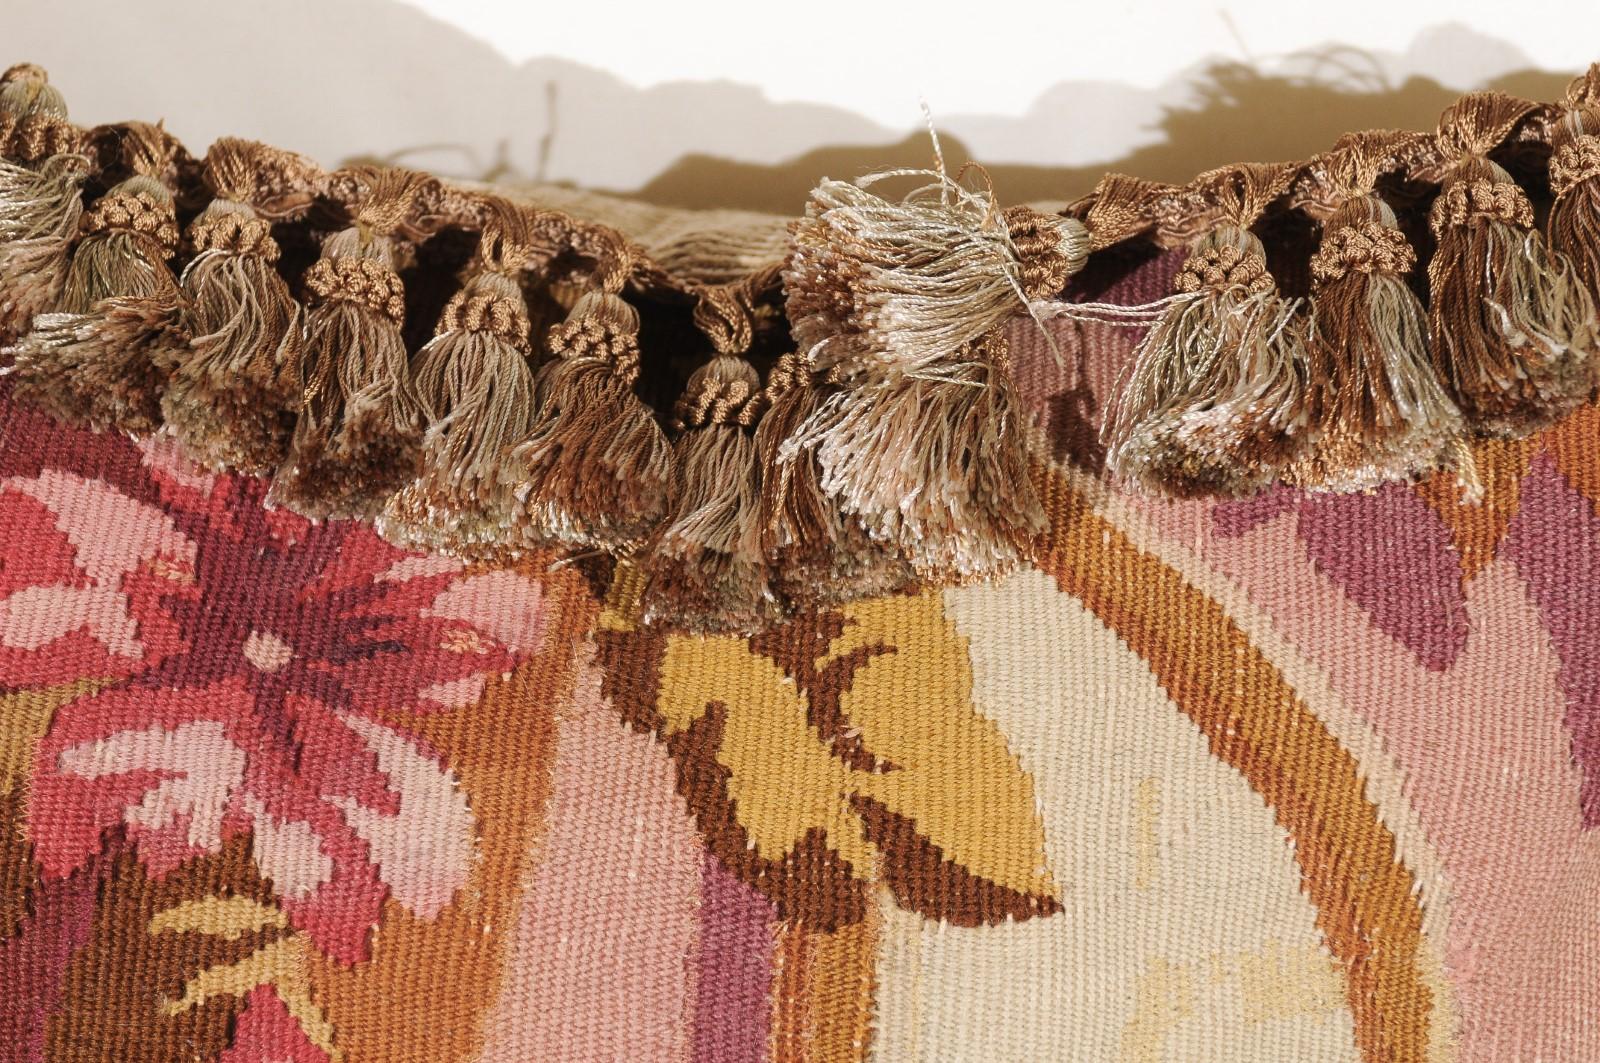 French 19th Century Aubusson Tapestry Pillow with Tassels and Floral Décor For Sale 3